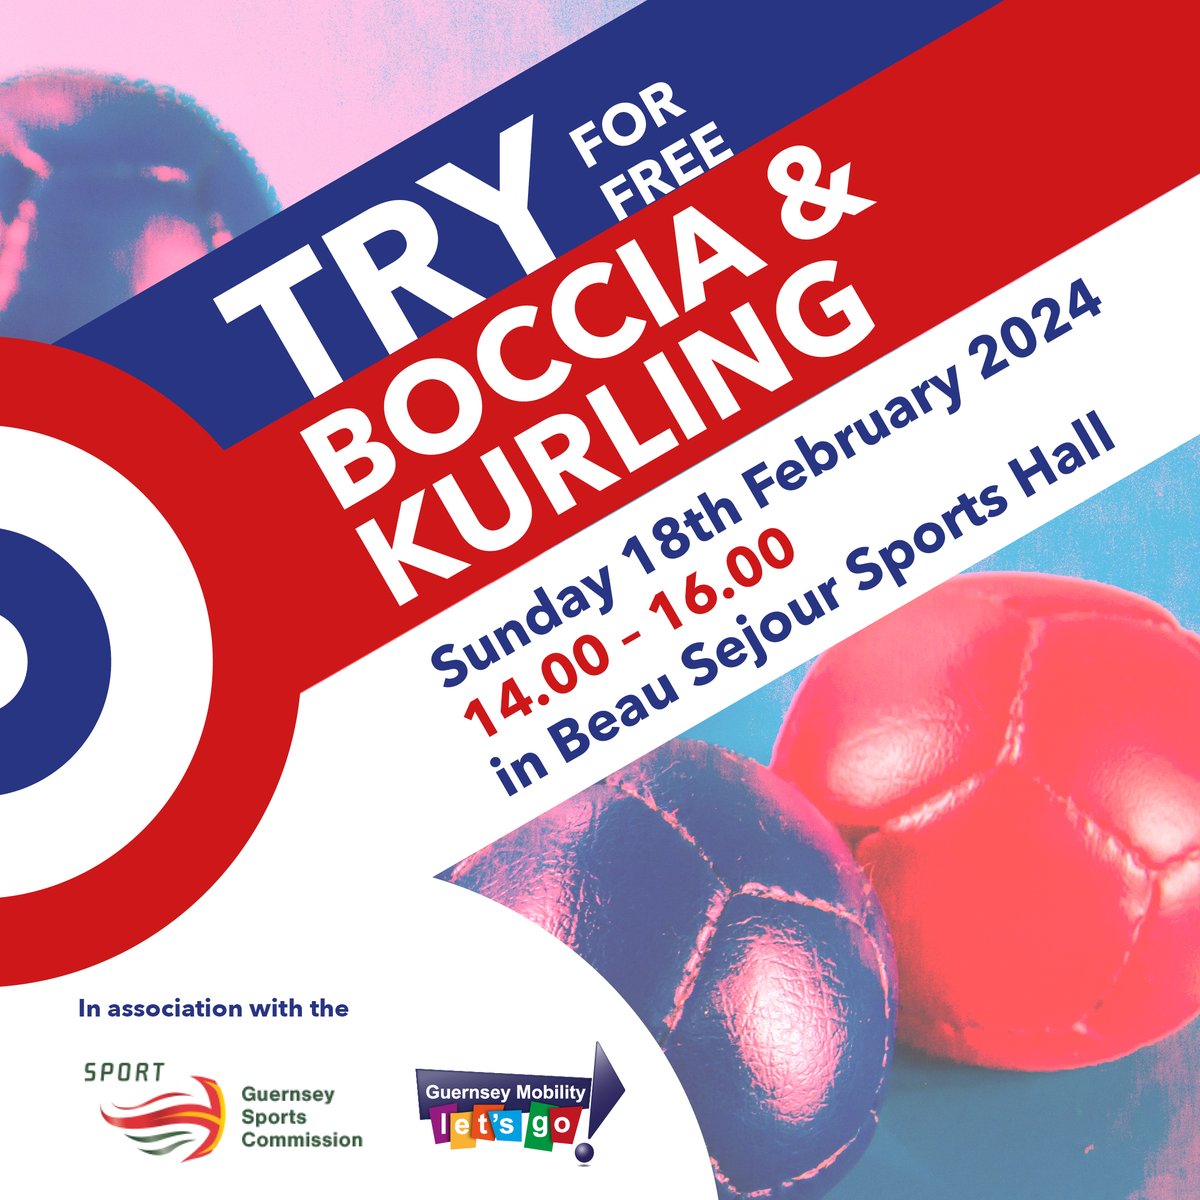 Exciting news! We have joined forces with Guernsey Mobility Let's Go to host a FREE Boccia & Kurling taster session. All ages and abilities welcome. Bring the whole family 😀👇#getinvolved #lovesport